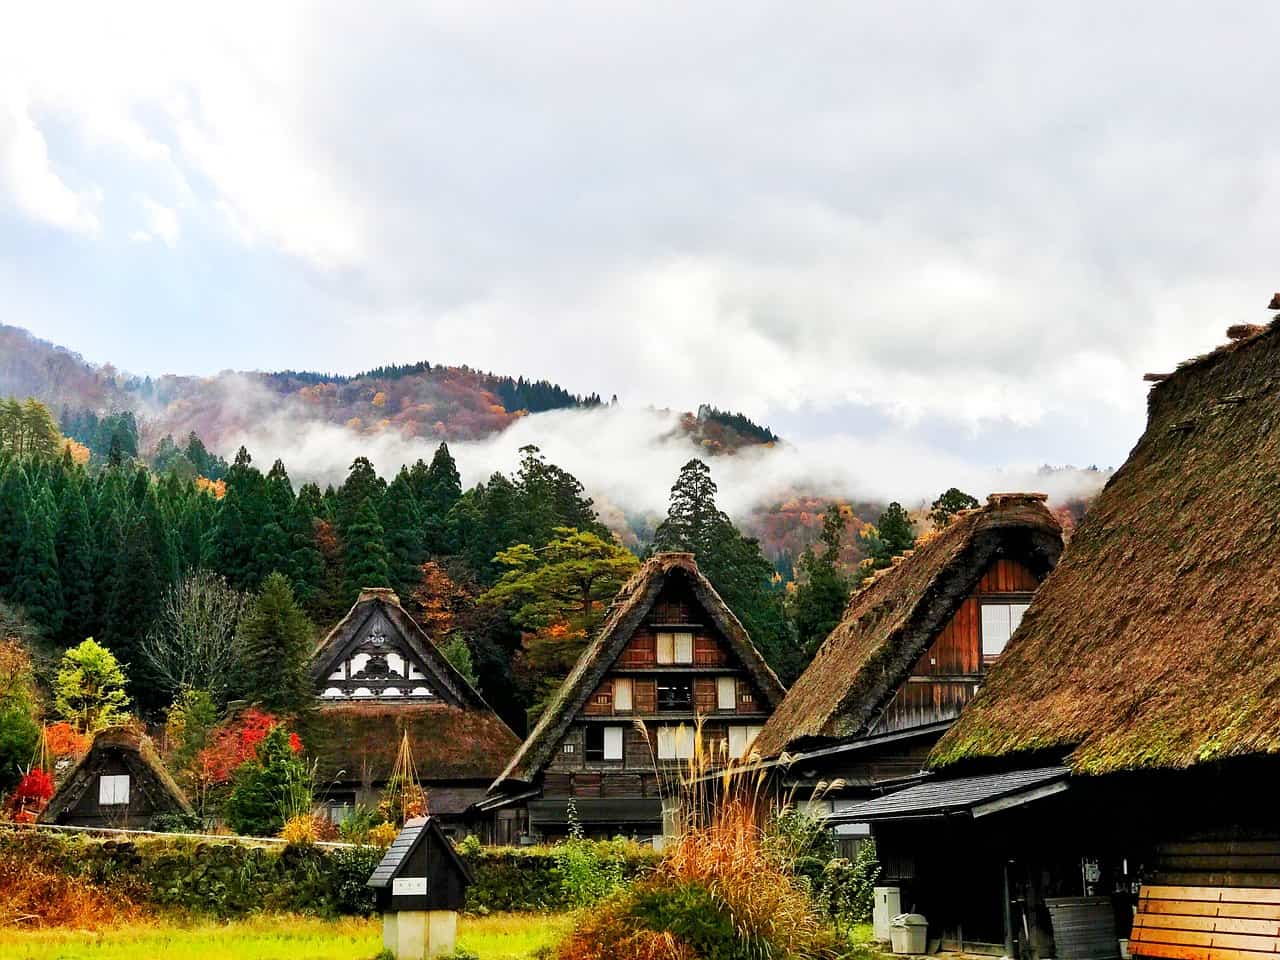 10 Amazingly Beautiful Small Villages in Japan